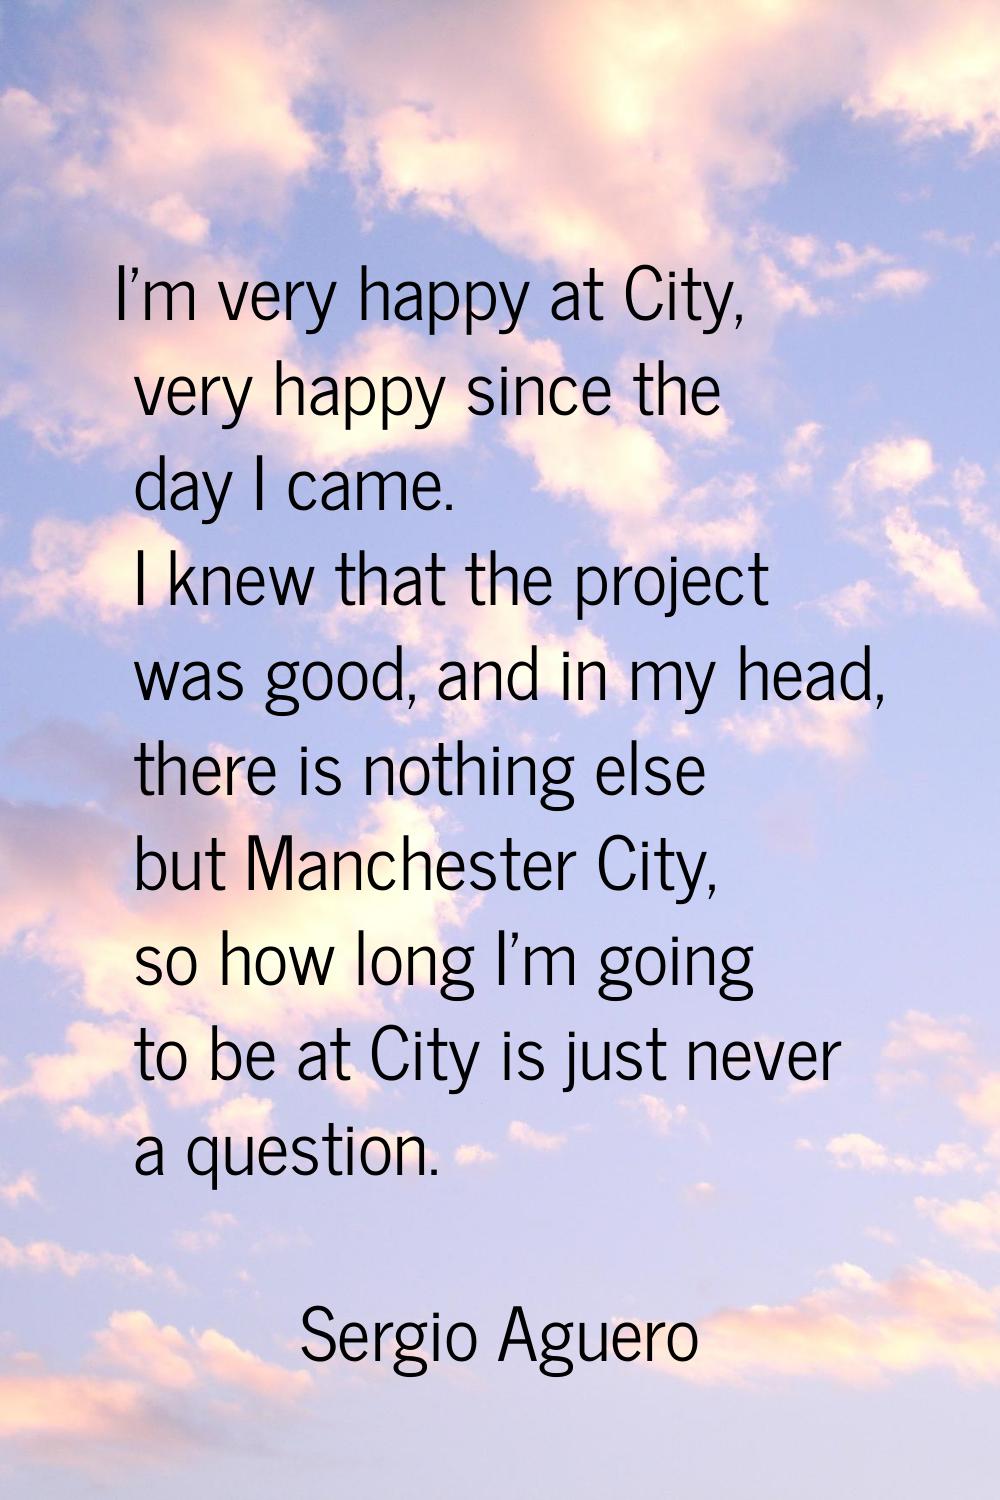 I'm very happy at City, very happy since the day I came. I knew that the project was good, and in m